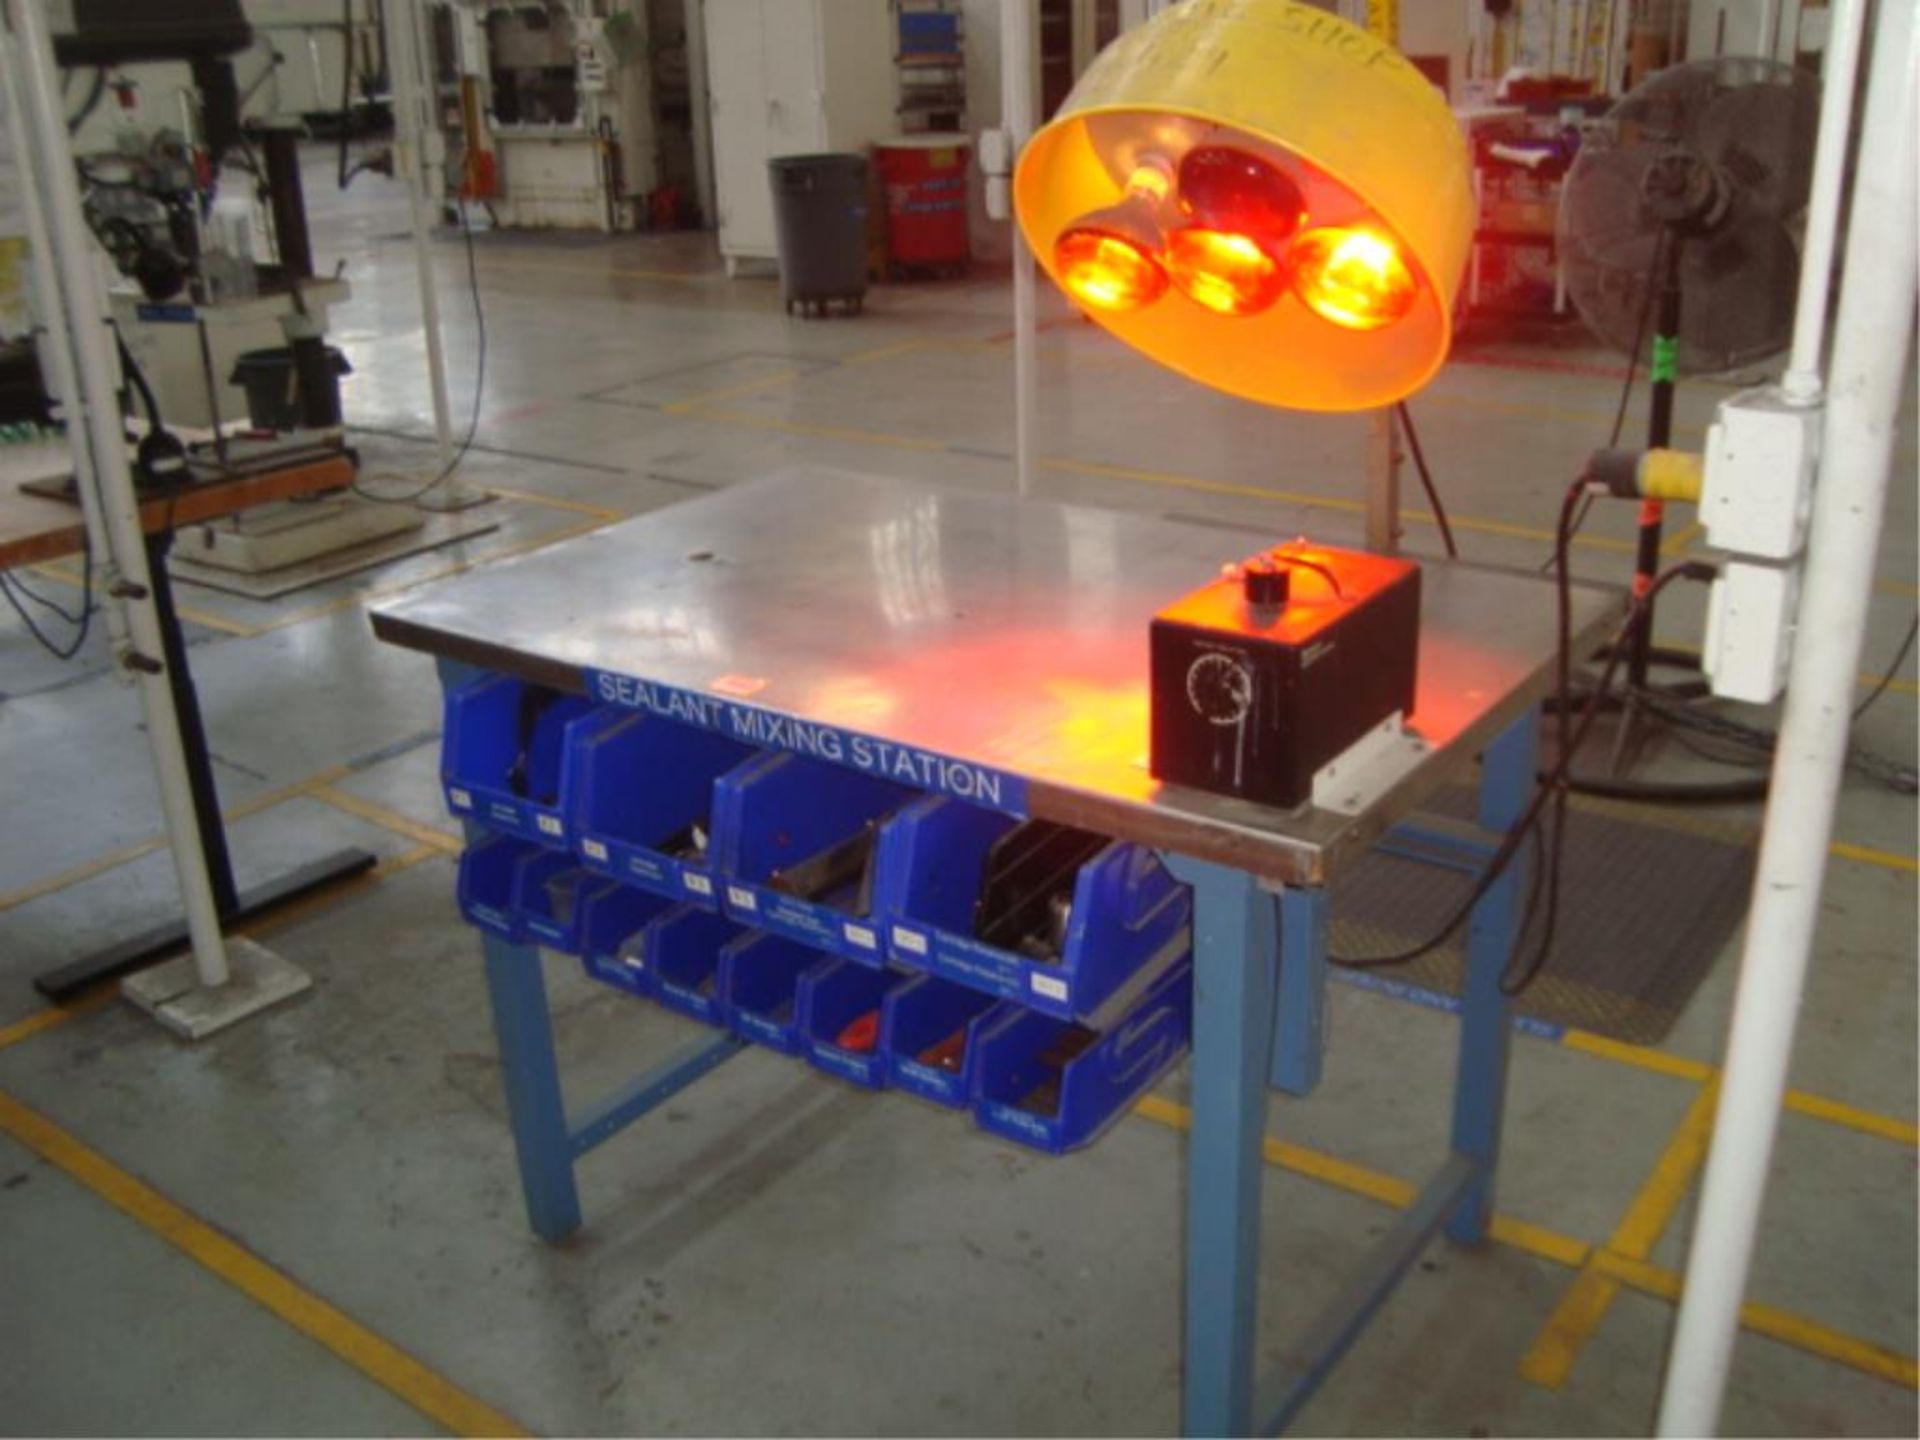 Sealant Mixing Station With Heat Curing Lamp - Image 4 of 4